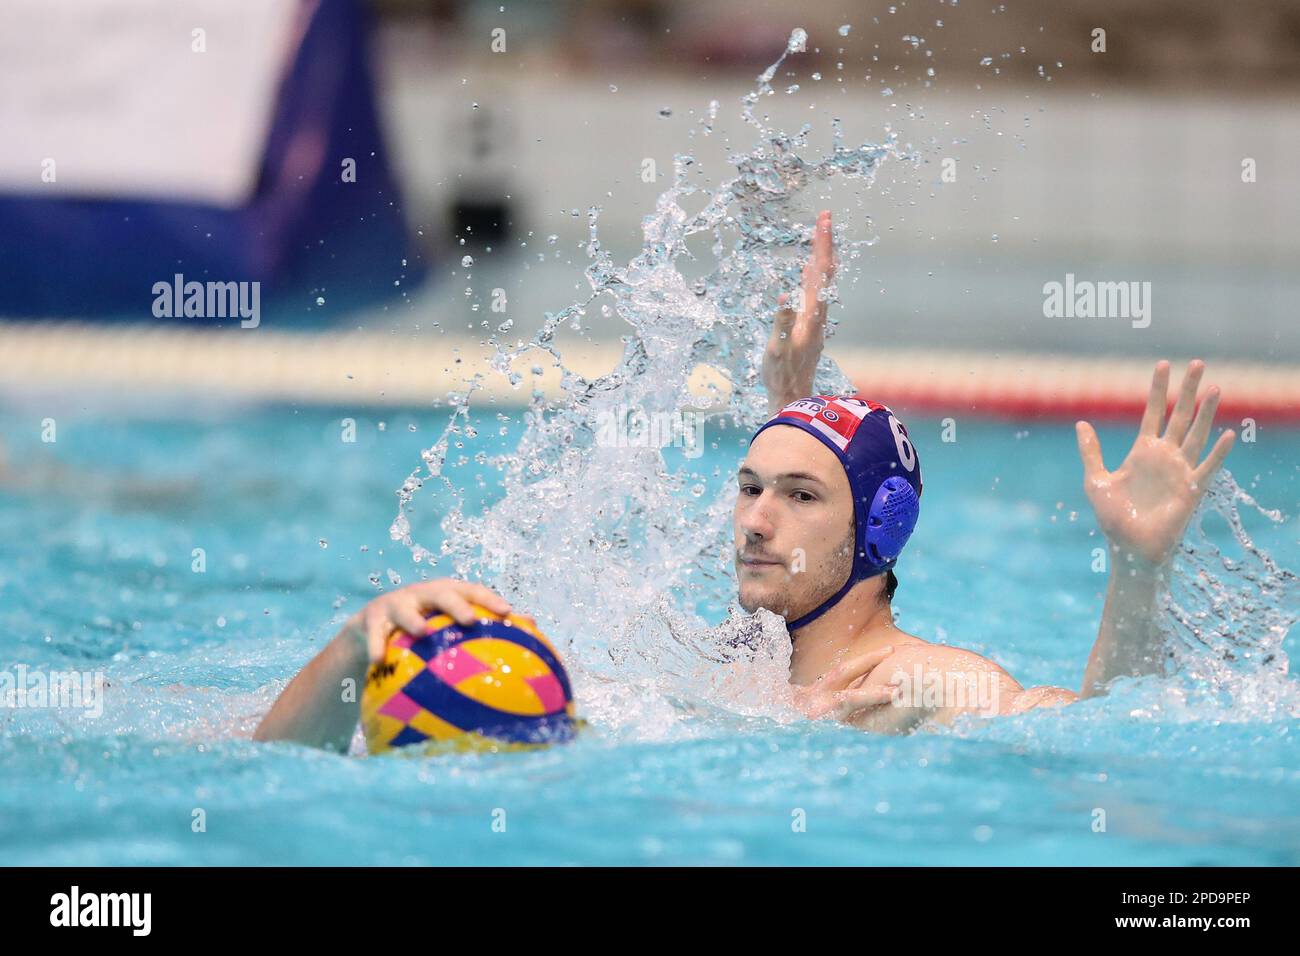 ZAGREB, CROATIA - MARCH 14: Luka Bukic of Croatia during the Men's Water  Polo World Cup match between Hungary and Croatia on March 14, 2023 at  Mladost Sports Park Pool in Zagreb,